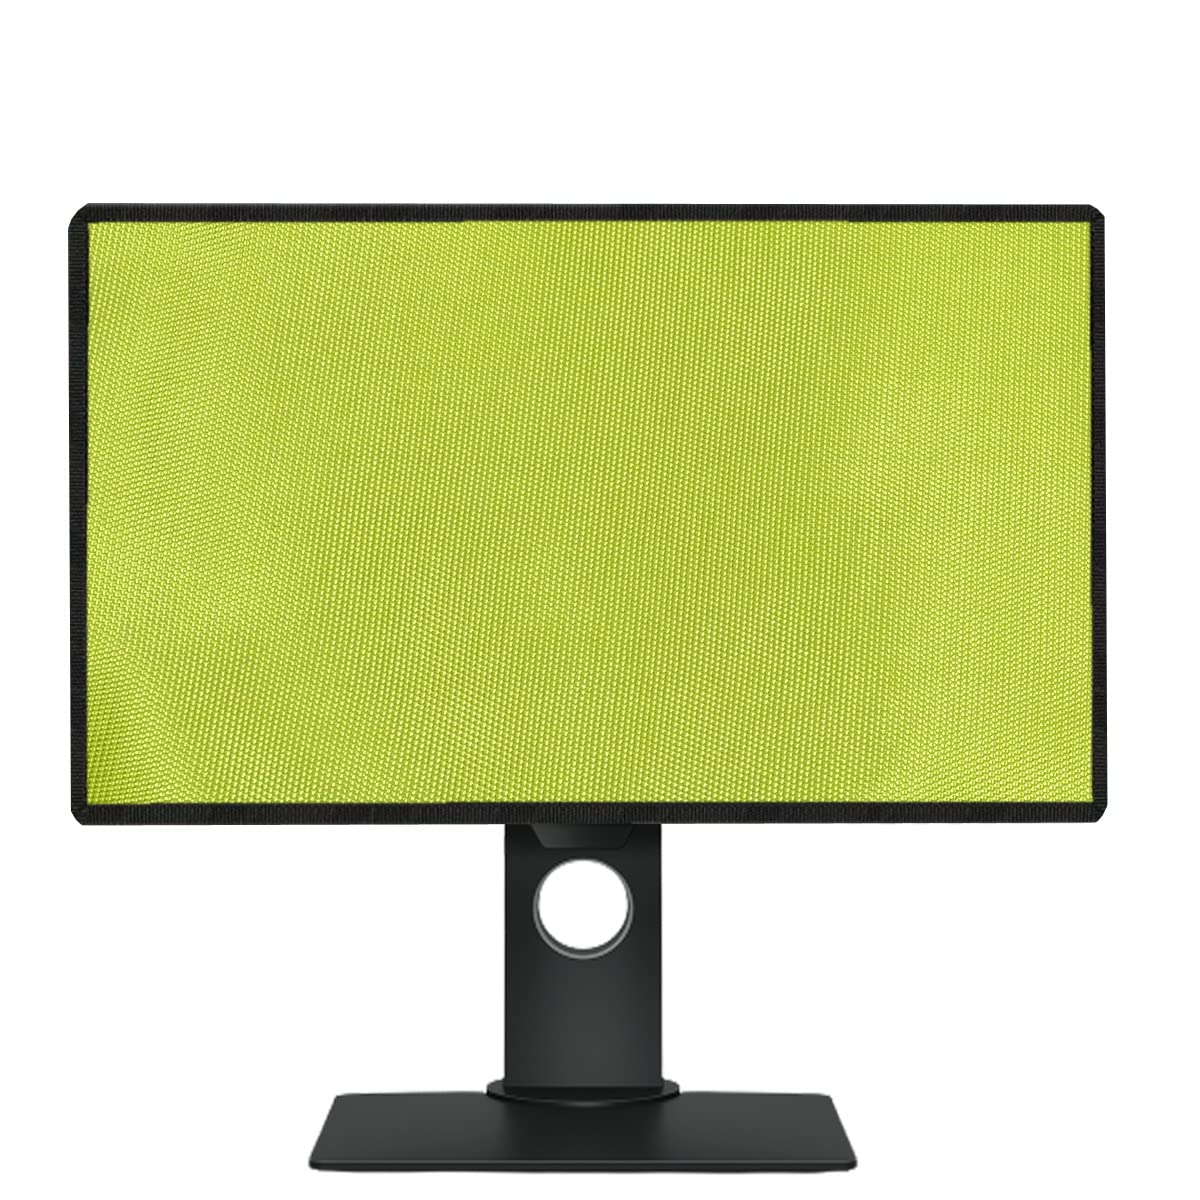 PalaP Super Premium Dust Proof Monitor Cover for ASUS 24 inches Monitor (Green)